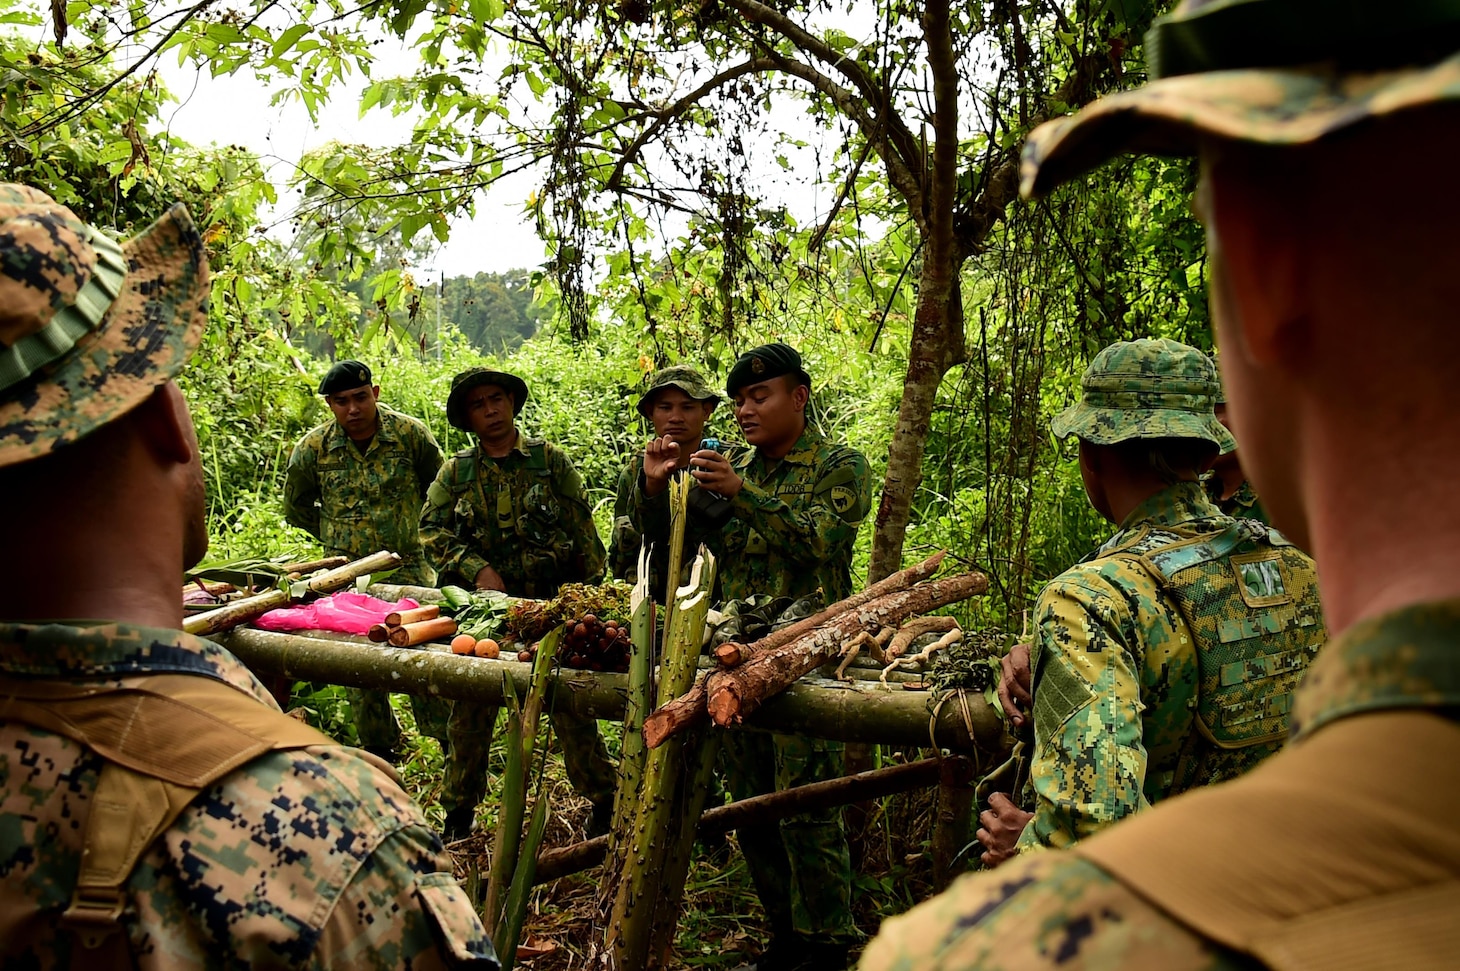 151105-N-QV906-011 BANDAR SERI BEGAWAN, Brunei (November 2, 2015) Members of the Royal Brunei Armed Forces teach members of the U.S. Marine Corps' 3rd Law Enforcement Battalion, Charlie Co., vital skills for surviving the harsh jungles of Endo-Asia during Cooperation Afloat Readiness and Training (CARAT) Brunei 2015, Nov. 5. CARAT is a series of annual, bilateral maritime exercises between the U.S. Navy, U.S. Marine Corps and the armed forces of nine partner nations to include Bangladesh, Brunei, Cambodia, Indonesia, Malaysia, the Philippines, Singapore, Thailand, and Timor-Liste.  (U.S. Navy photo by Mass Communications Specialist 1st Class Micah P. Blechner/RELEASED)